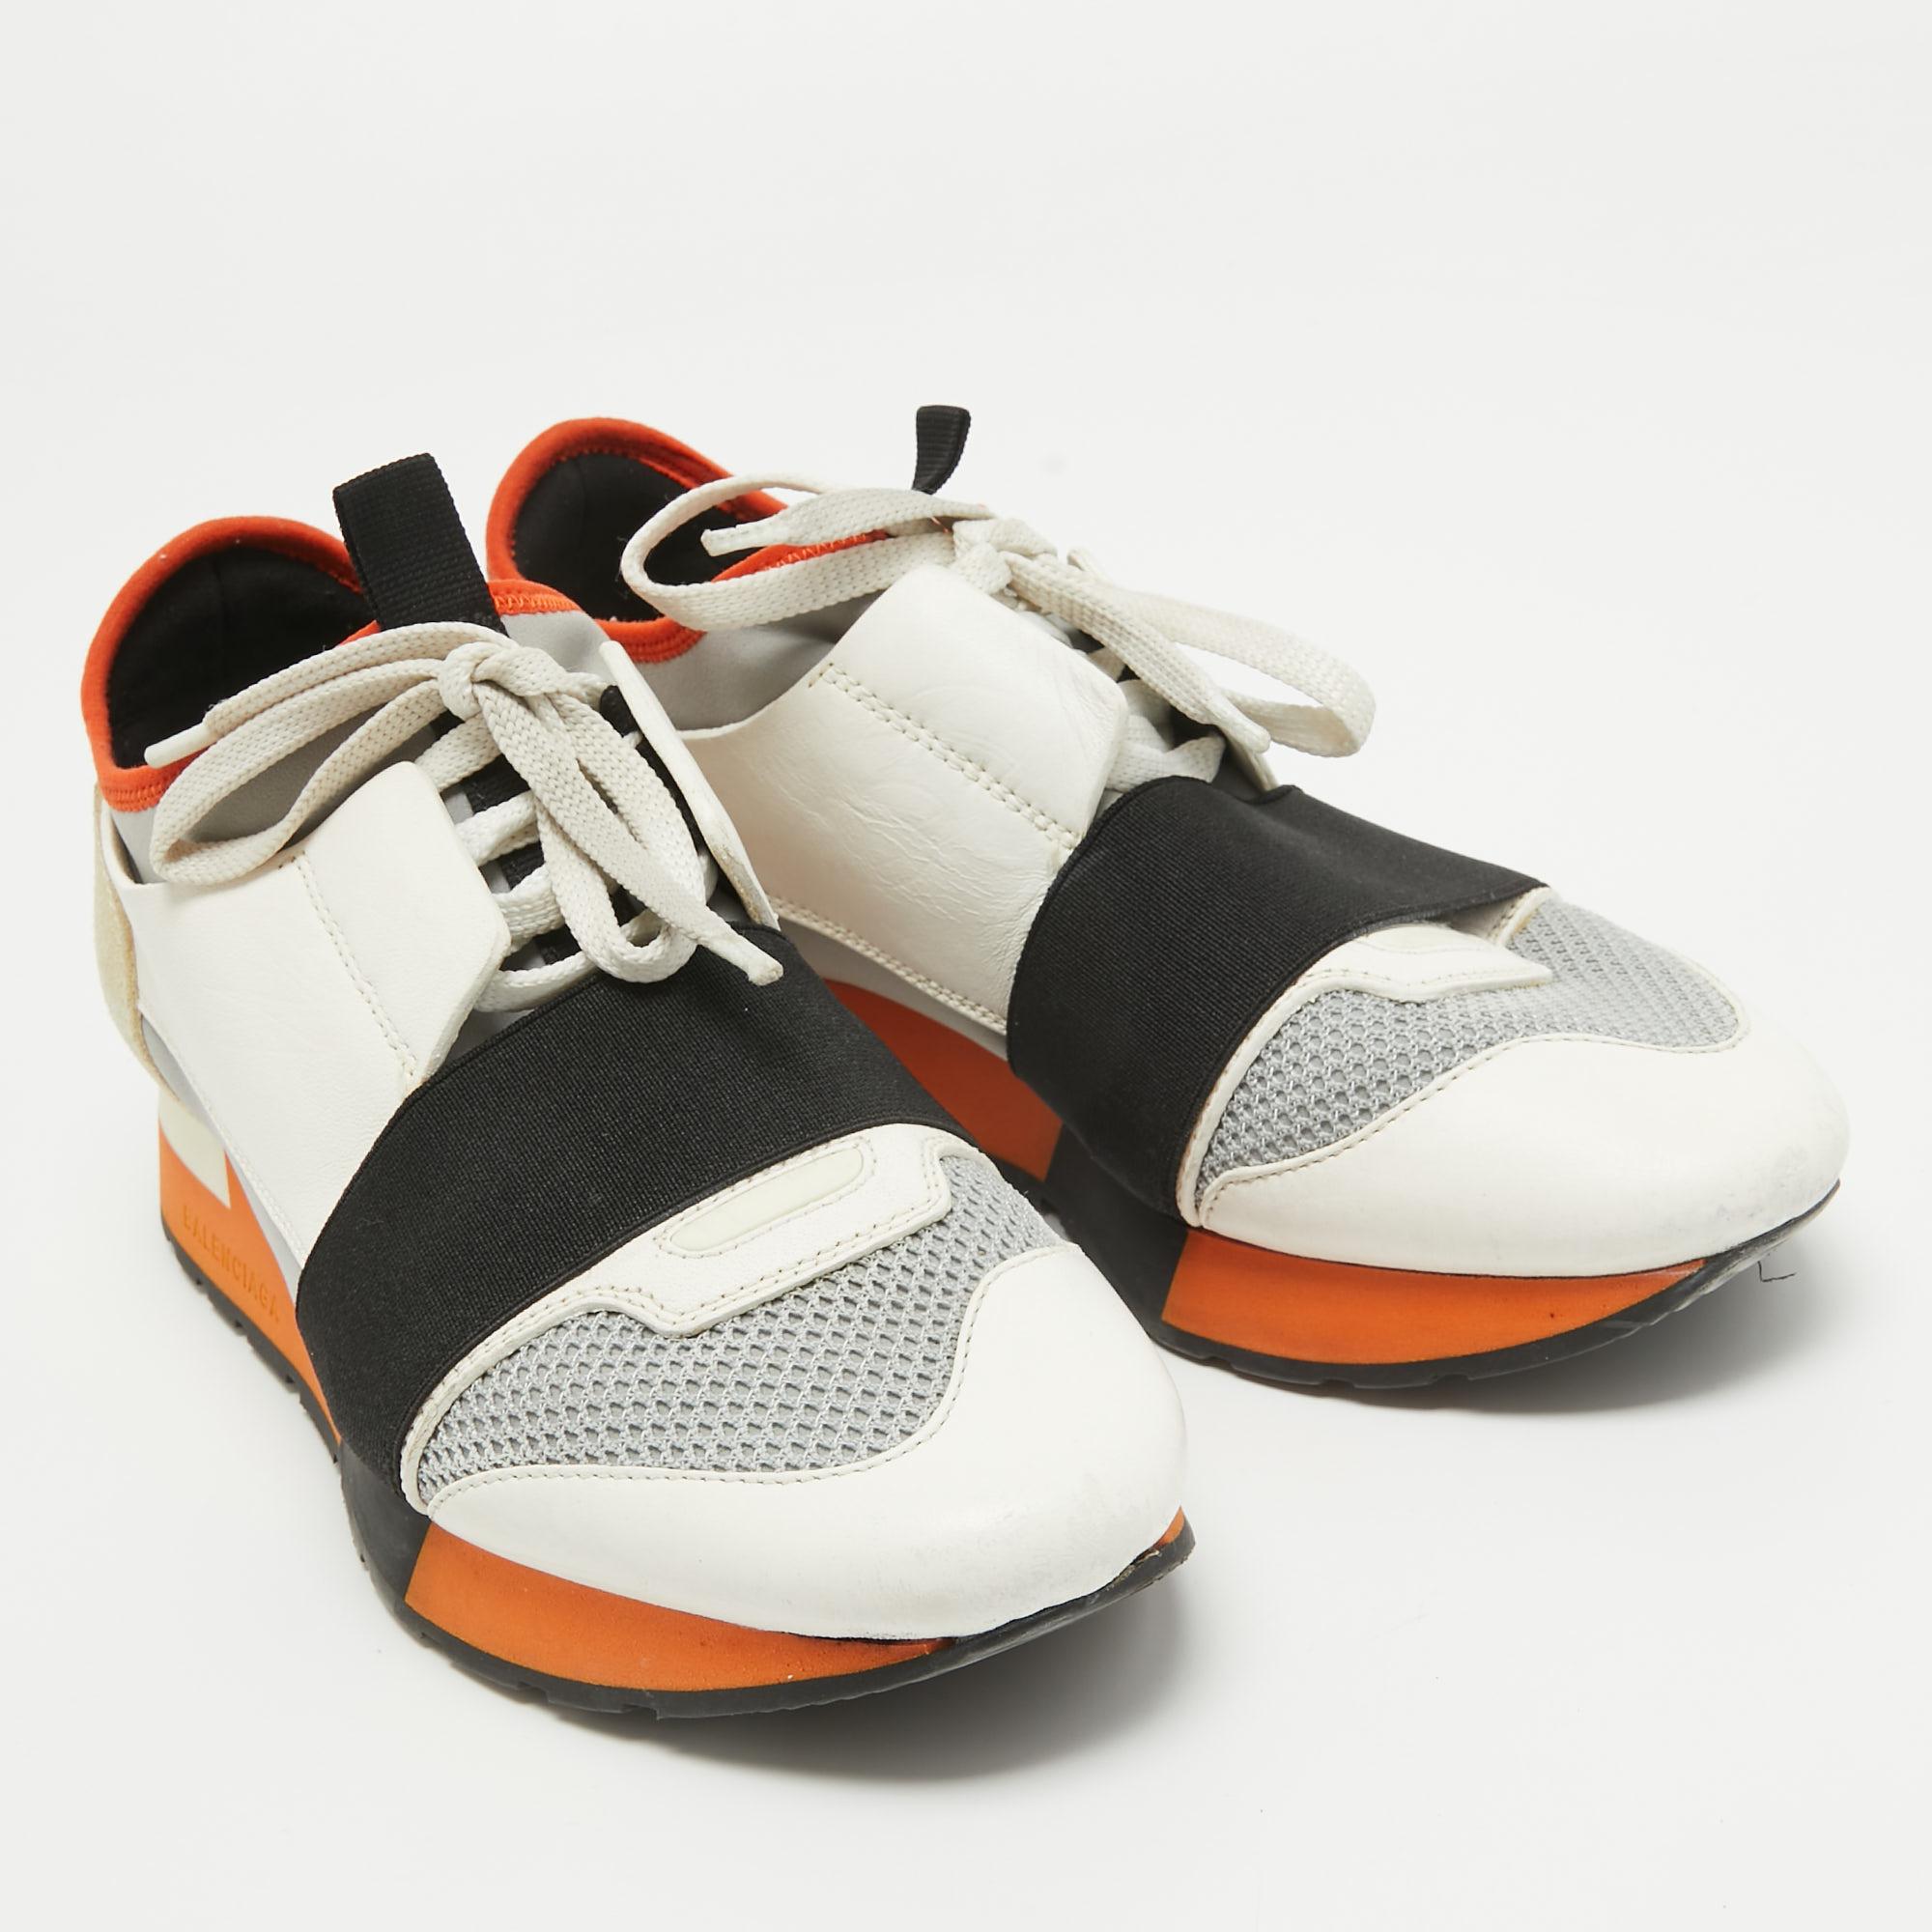 Balenciaga Tricolor Leather and Mesh Race Runner Sneakers Size 37 For Sale 1